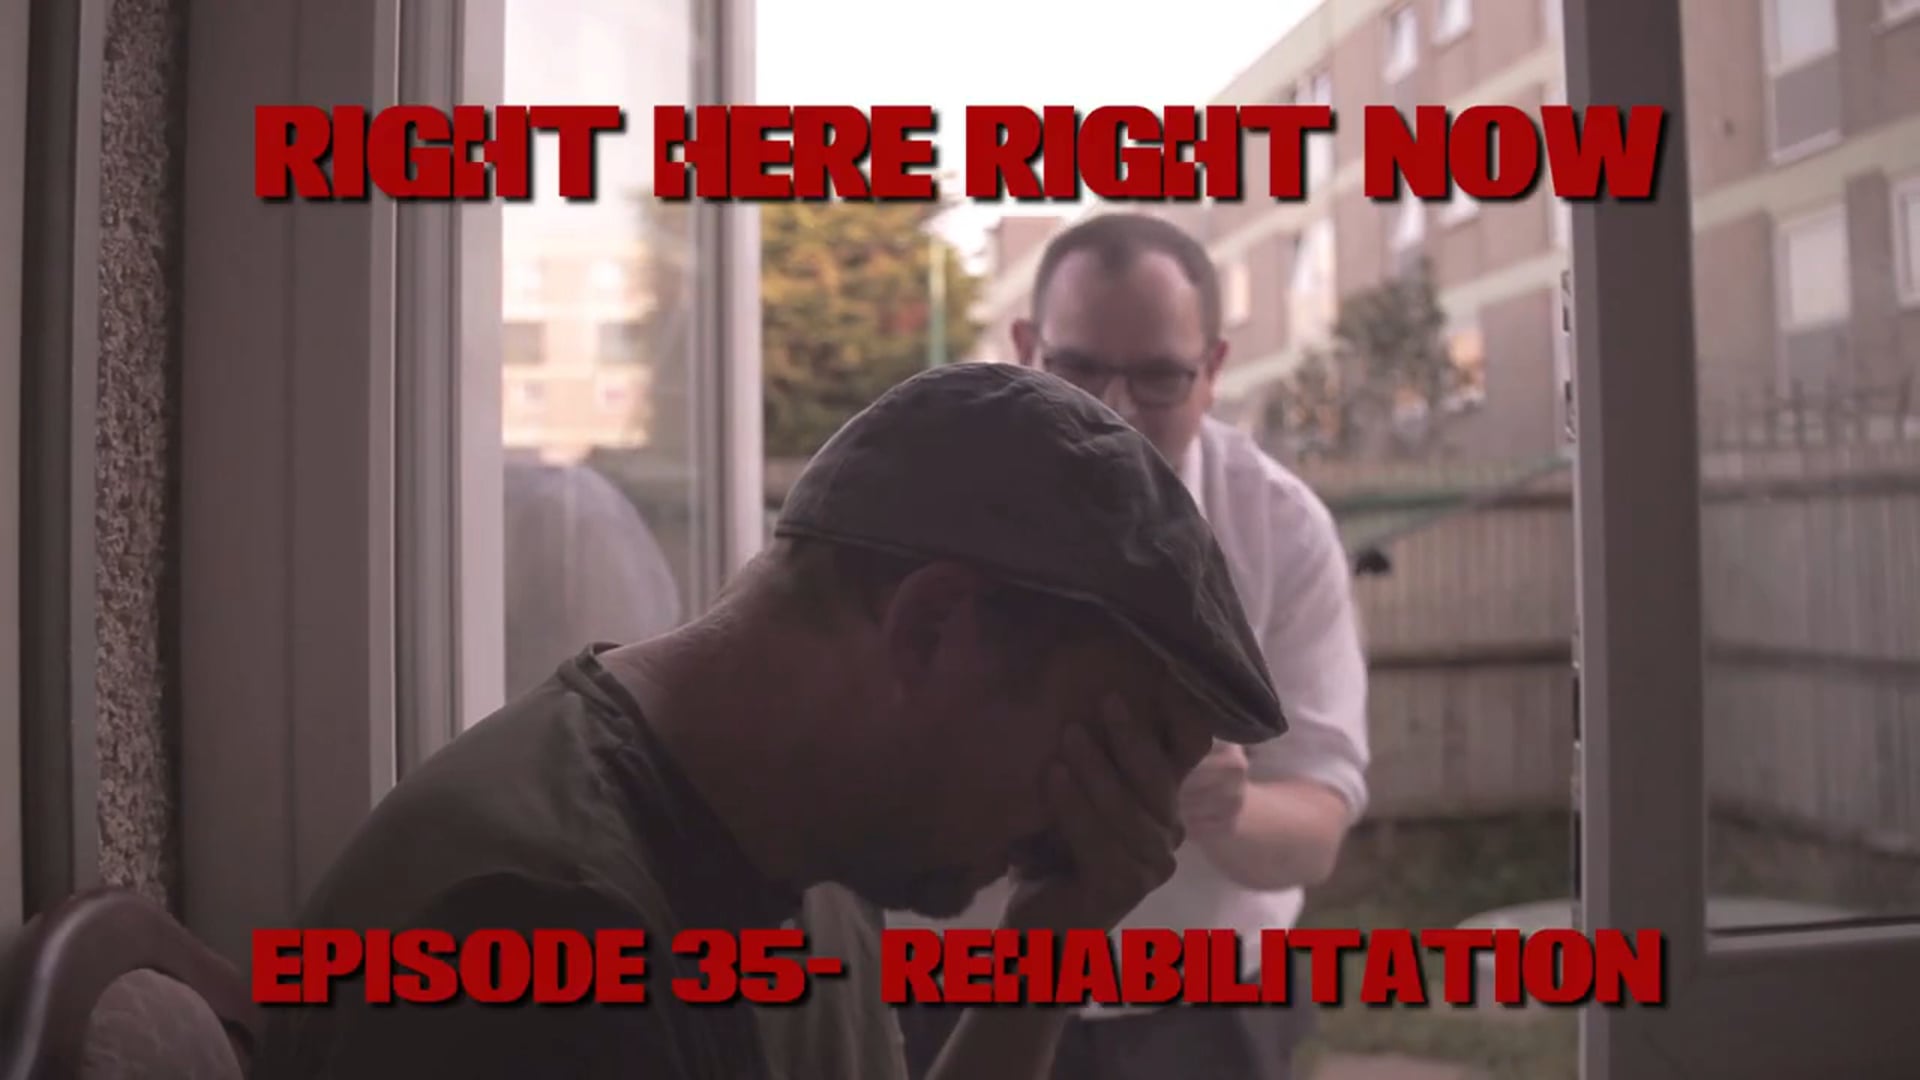 Watch Right Here Right Now:  Episode 35 (Rehabilitation) on our Free Roku Channel